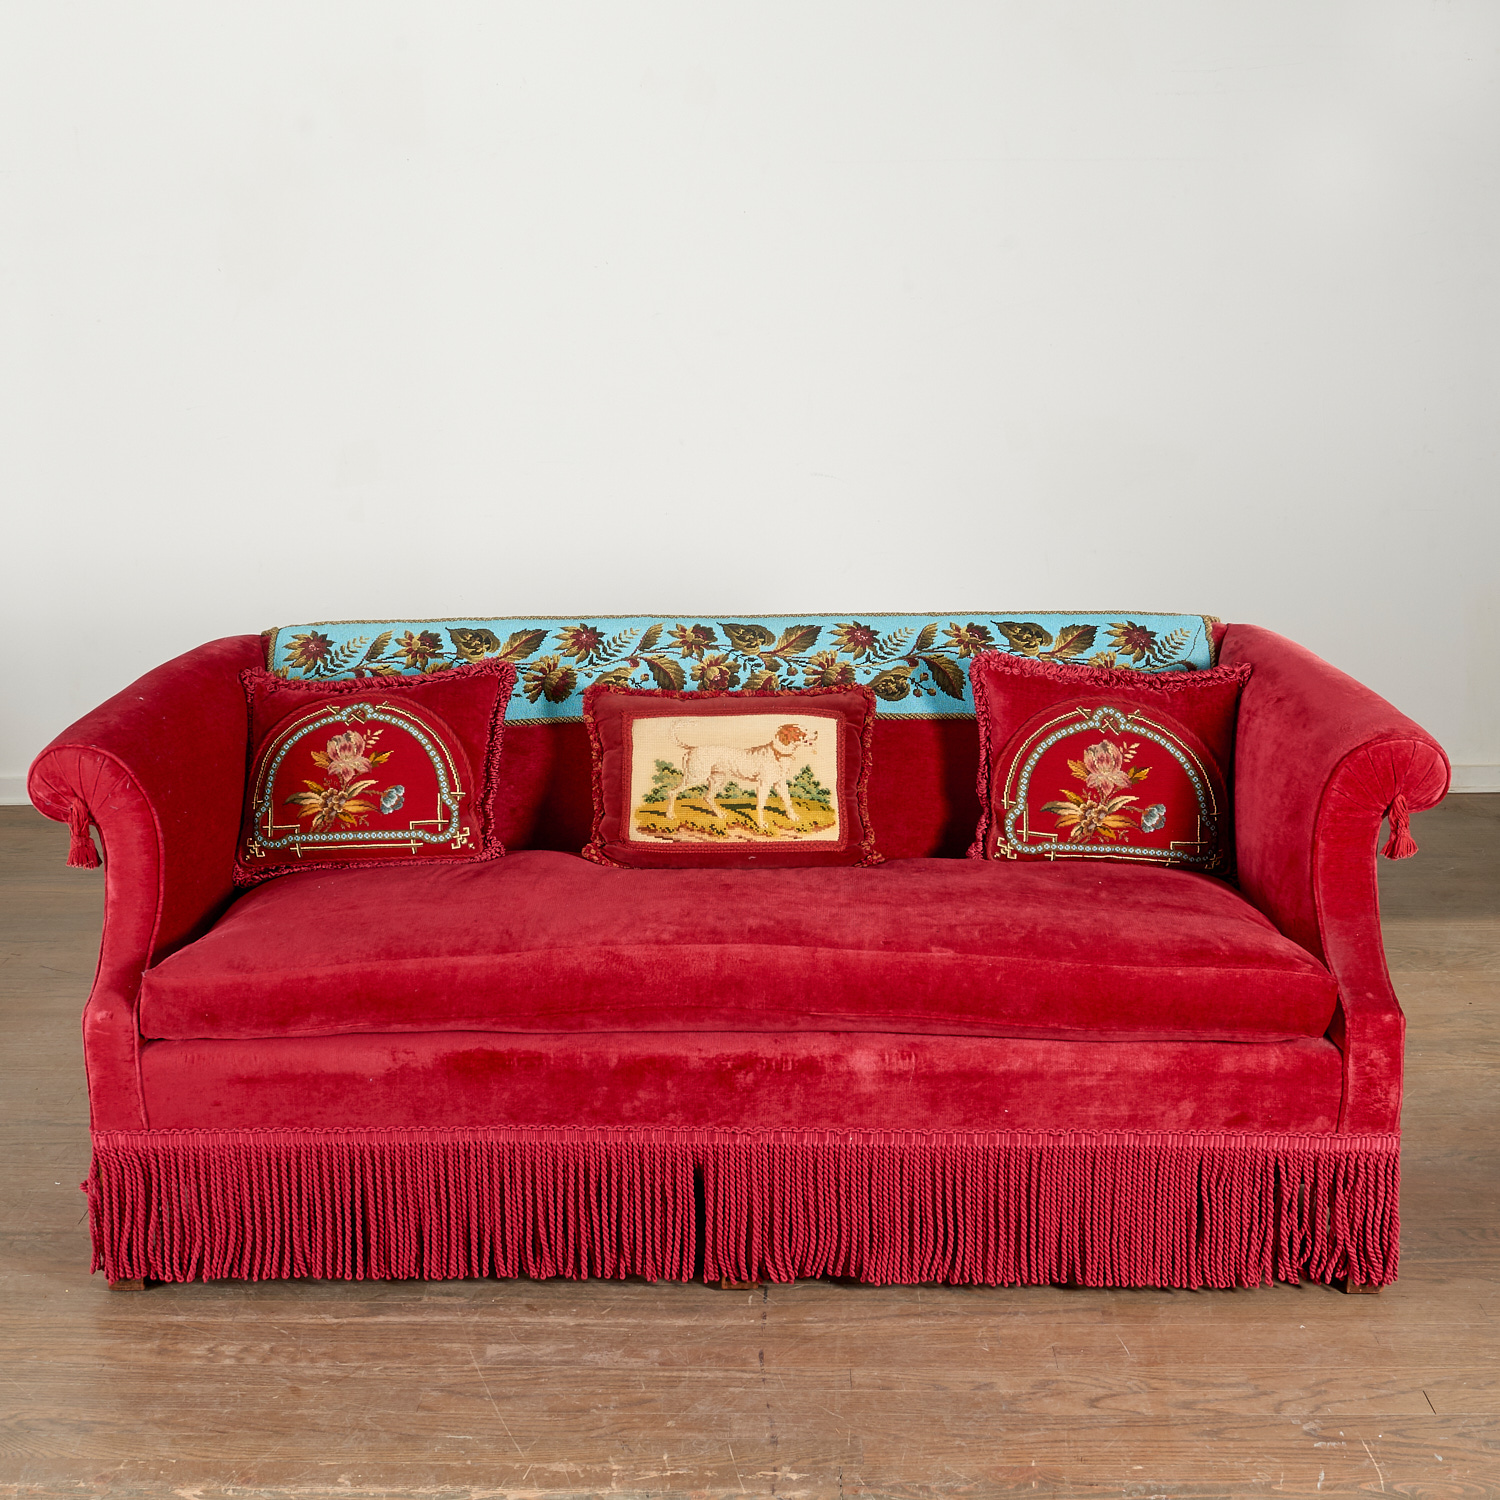 NICE RED VELVET SOFA WITH VICTORIAN